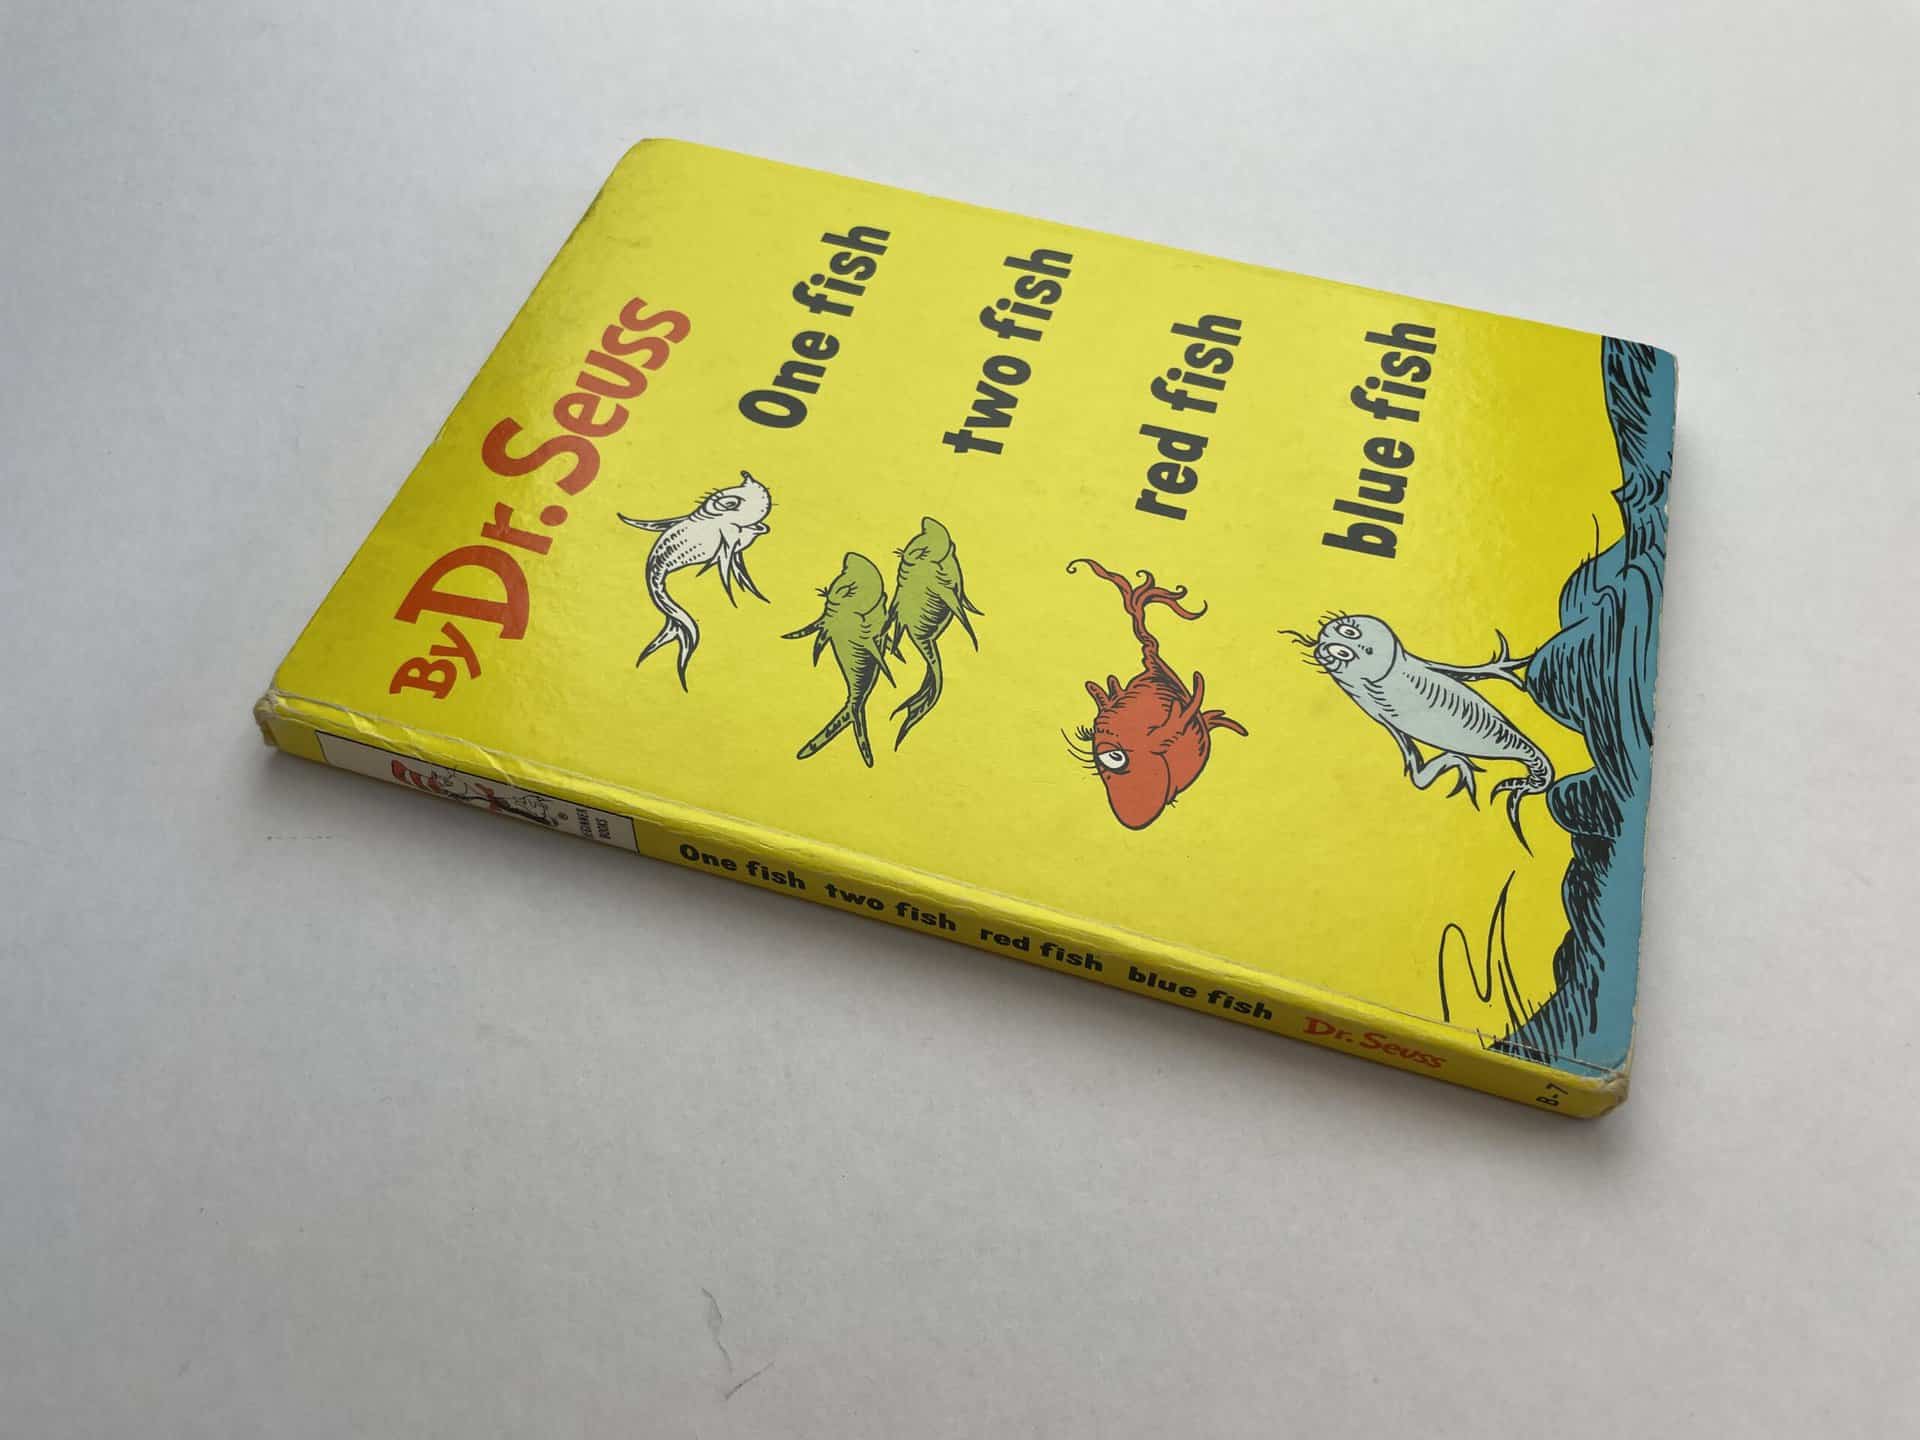 Dr. Seuss - One Fish, Two Fish, Red Fish, Blue Fish - First UK Edition ...